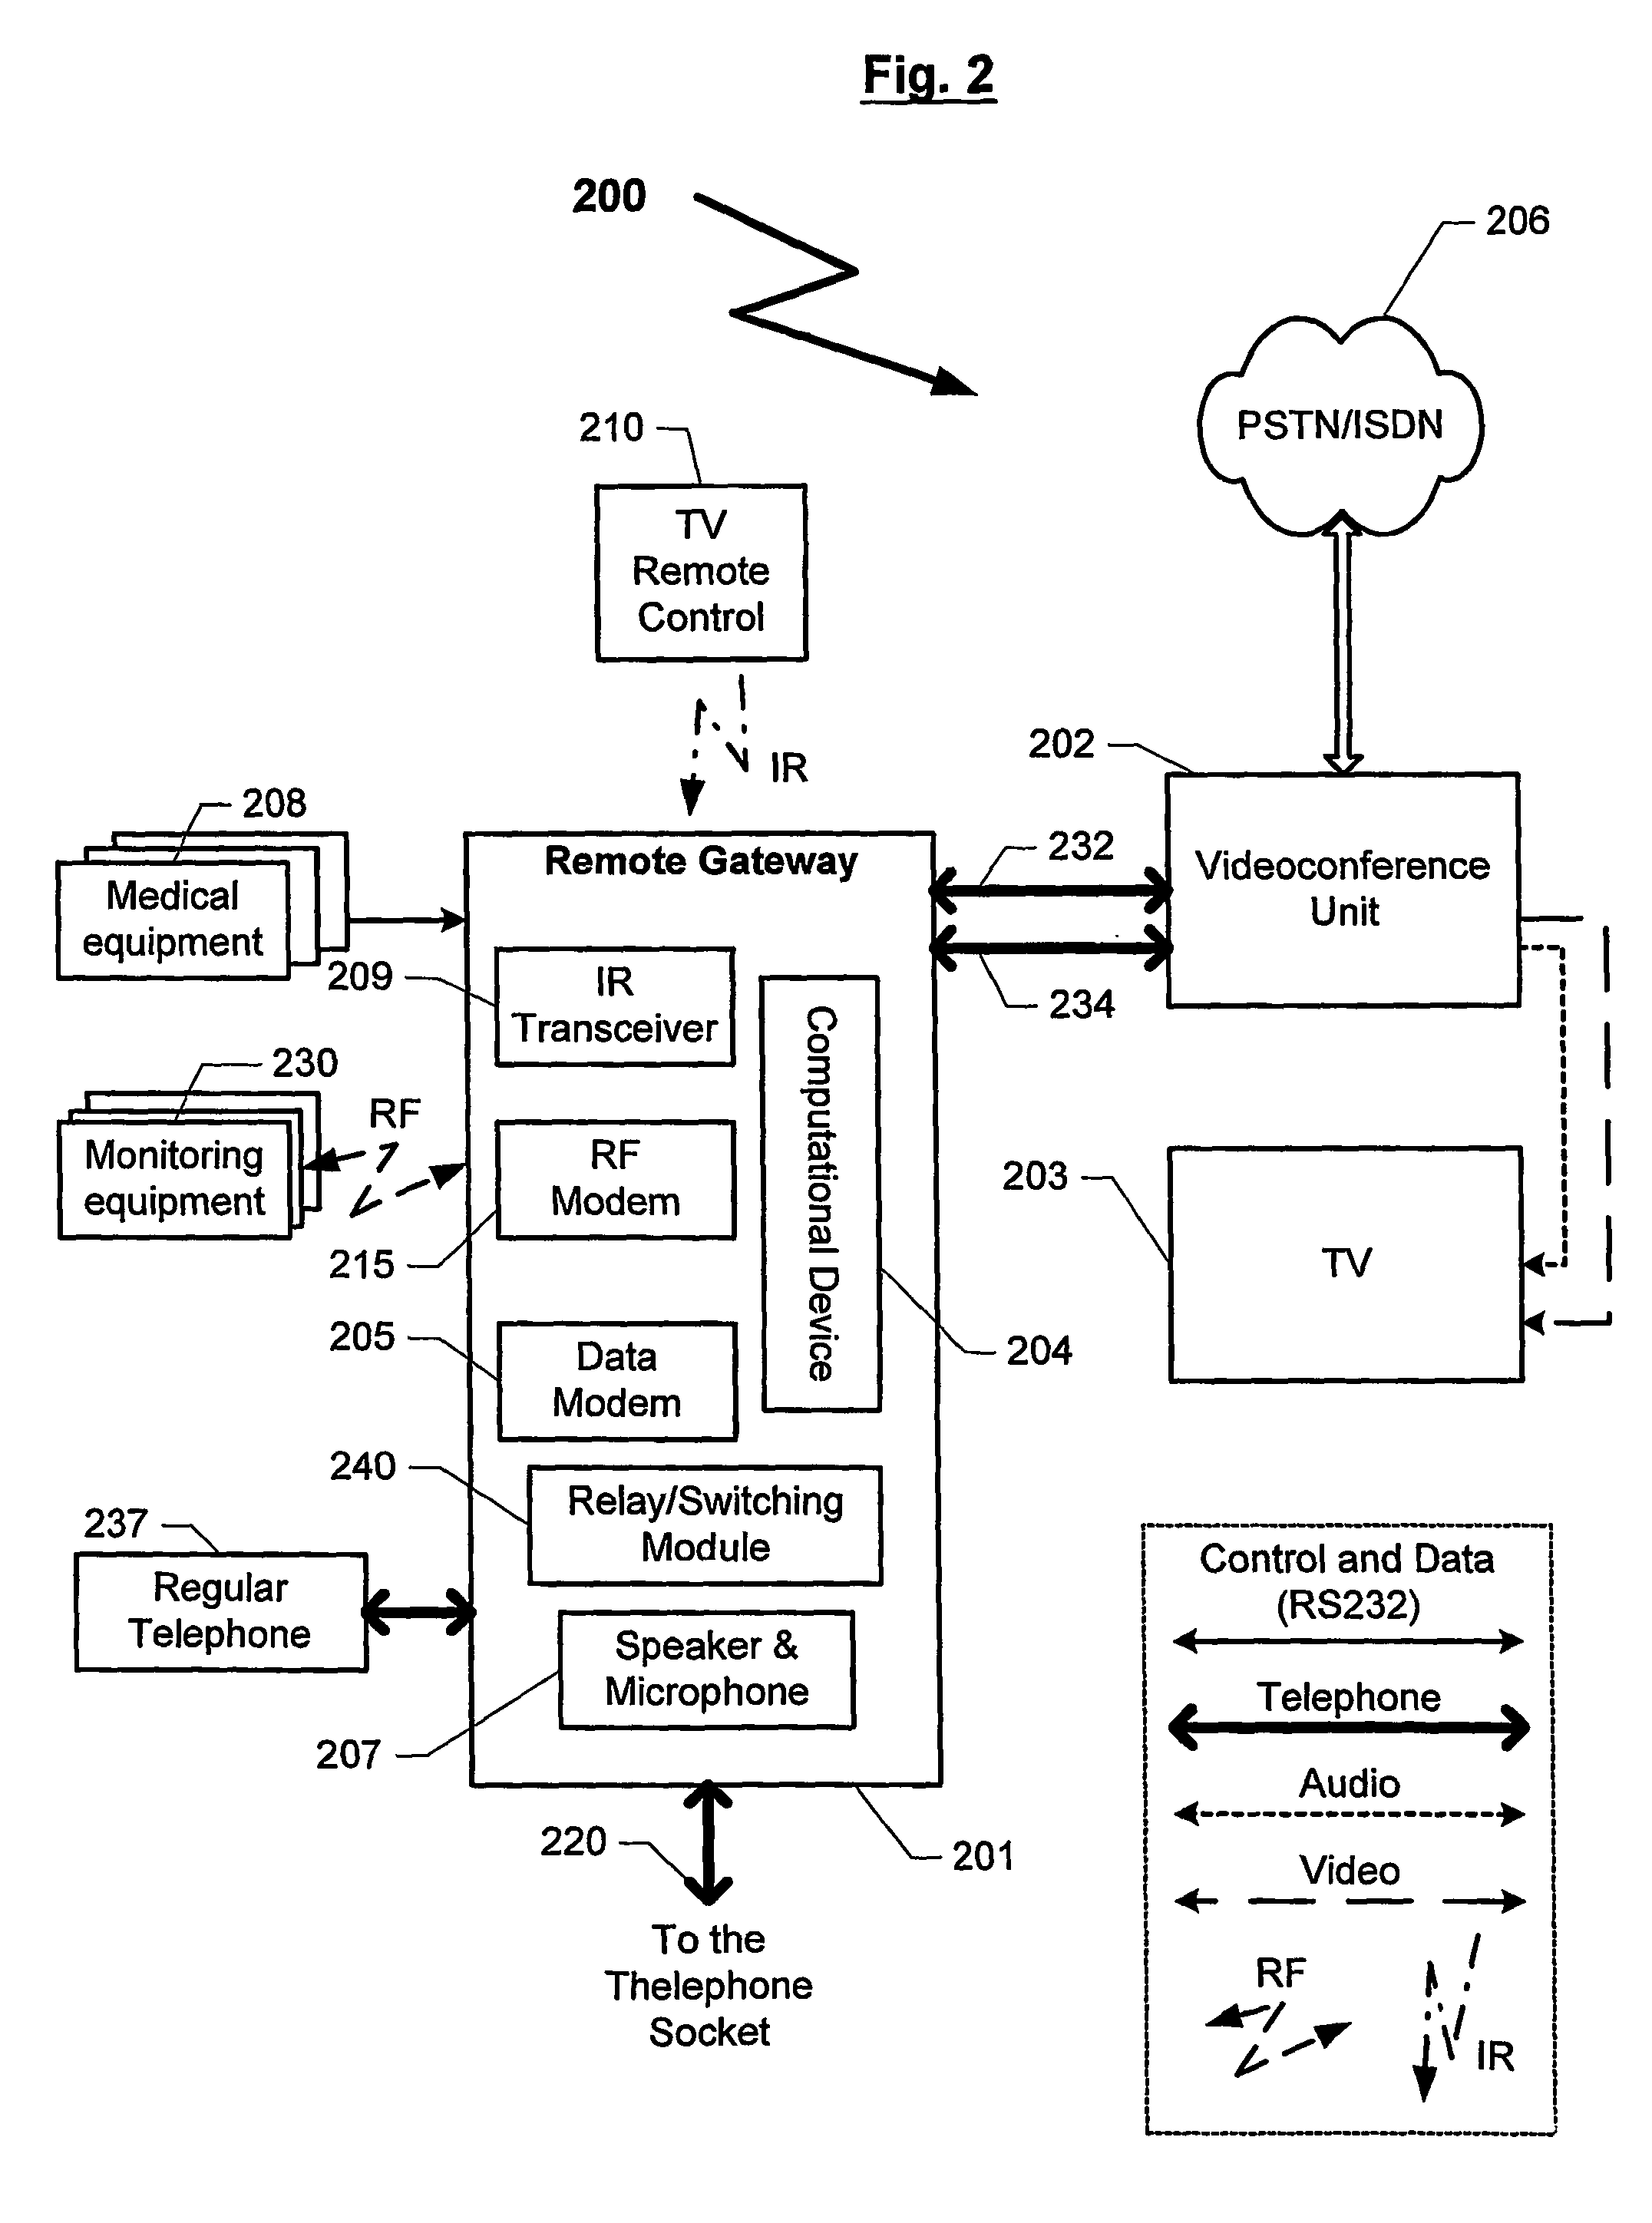 Visual medical monitoring system for a remote subject